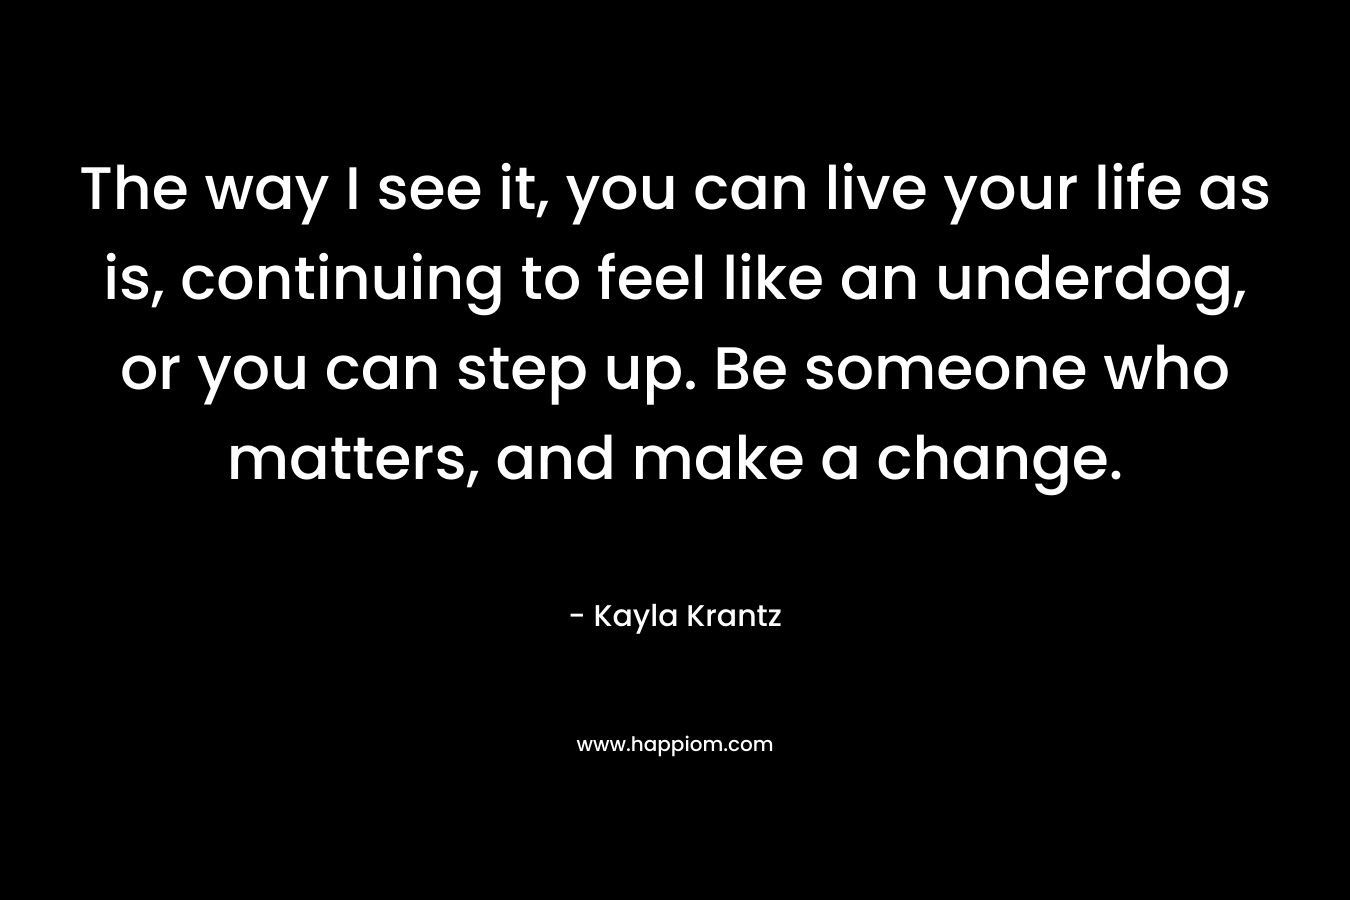 The way I see it, you can live your life as is, continuing to feel like an underdog, or you can step up. Be someone who matters, and make a change. – Kayla Krantz